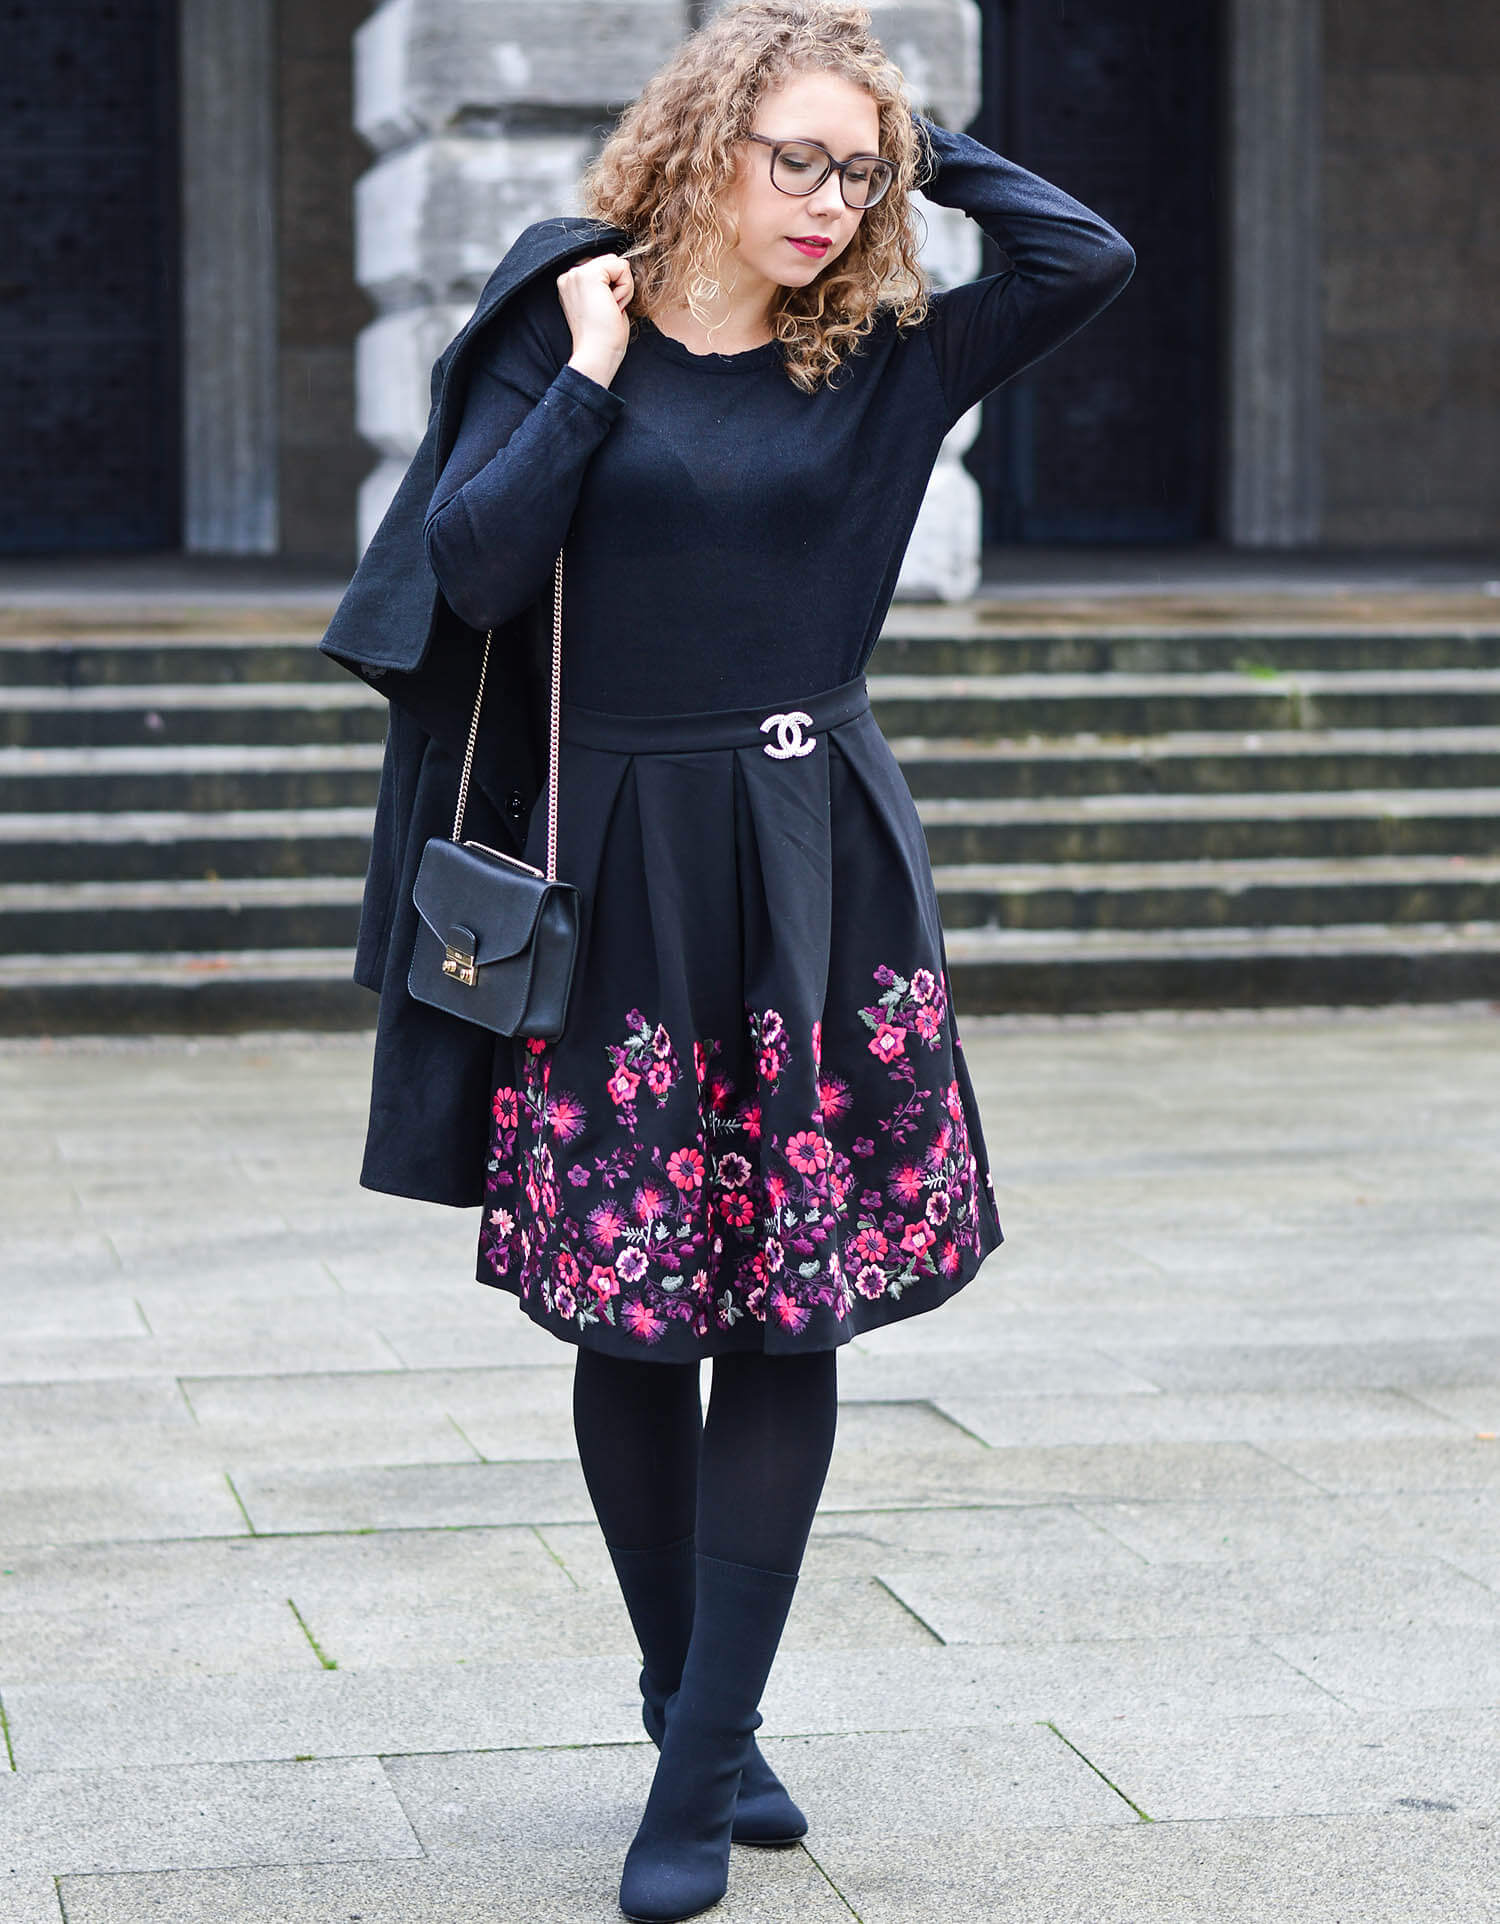 Kationette-fashionblogger-nrw-Merry-Christmas-Outfit-New-Hallhuber-Skirt-with-Flower-Embroidery